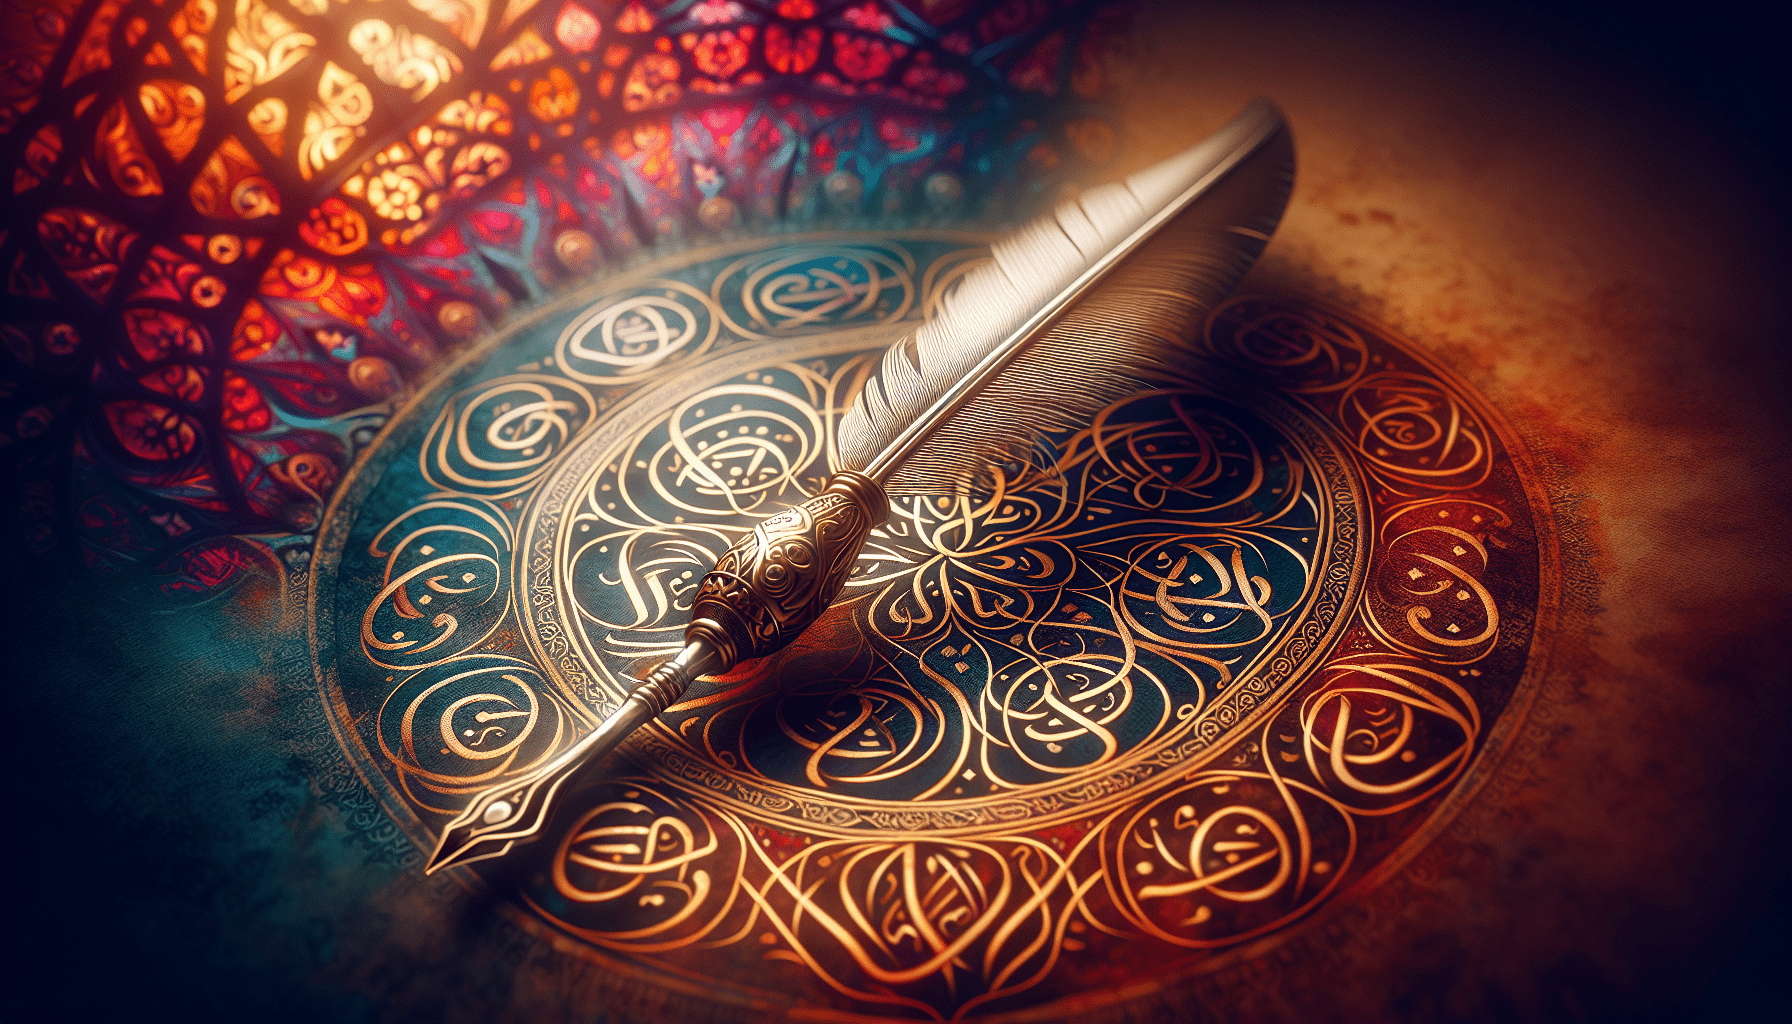 An ornate quill pen rests on an intricately patterned circular surface with a mosaic-like design, illuminated by warm and colorful ambient light.